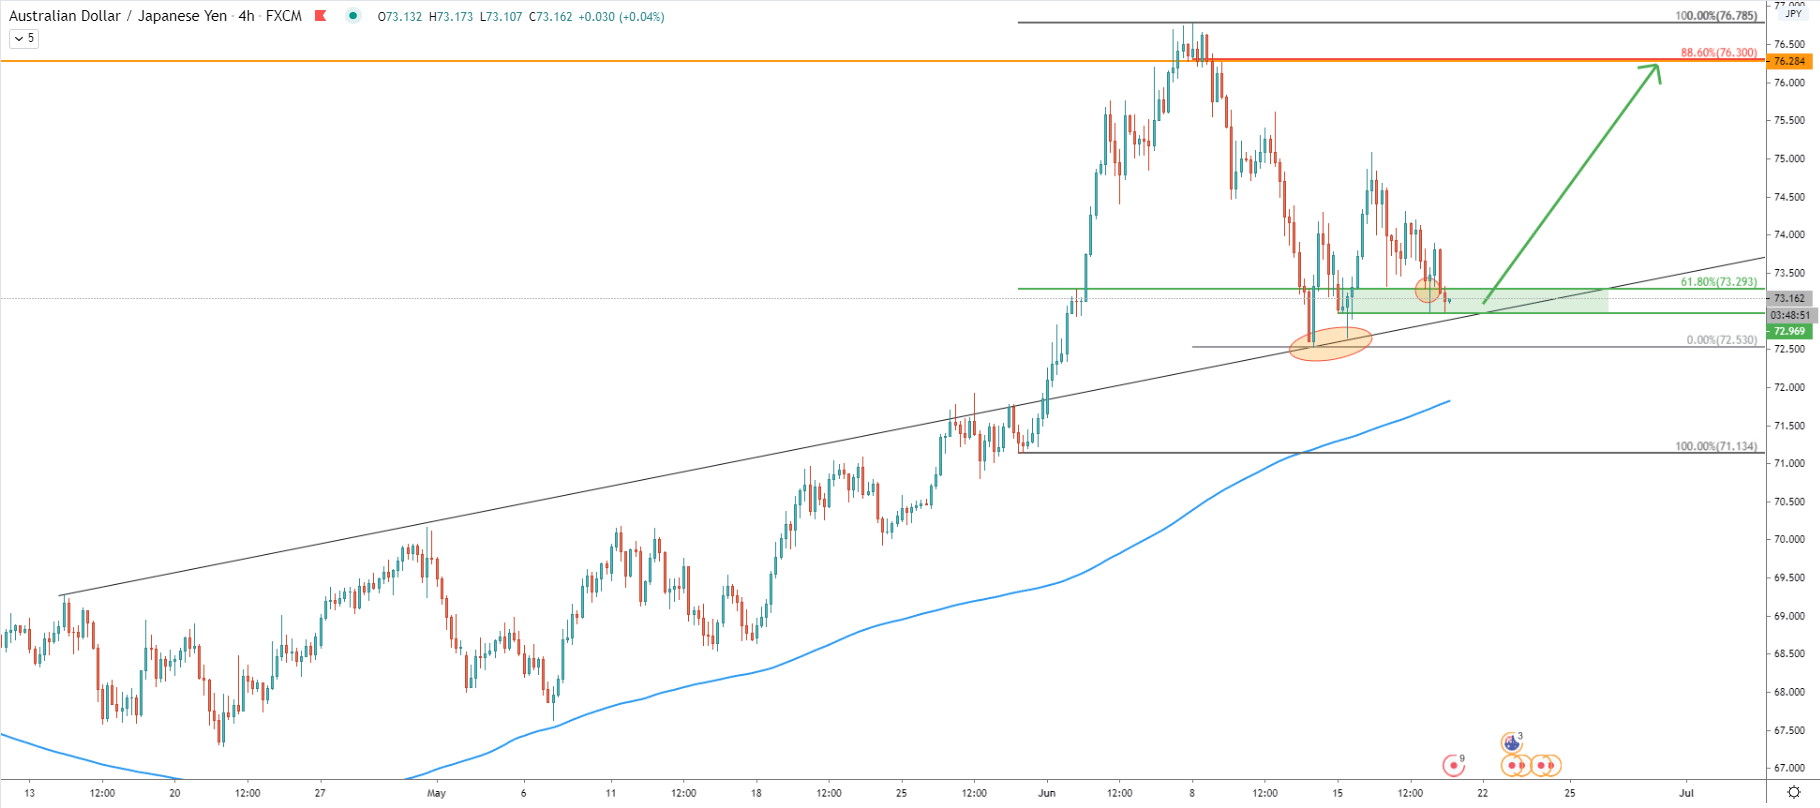 AUD/JPY 4-Hour Technical Analysis 18 June 2020